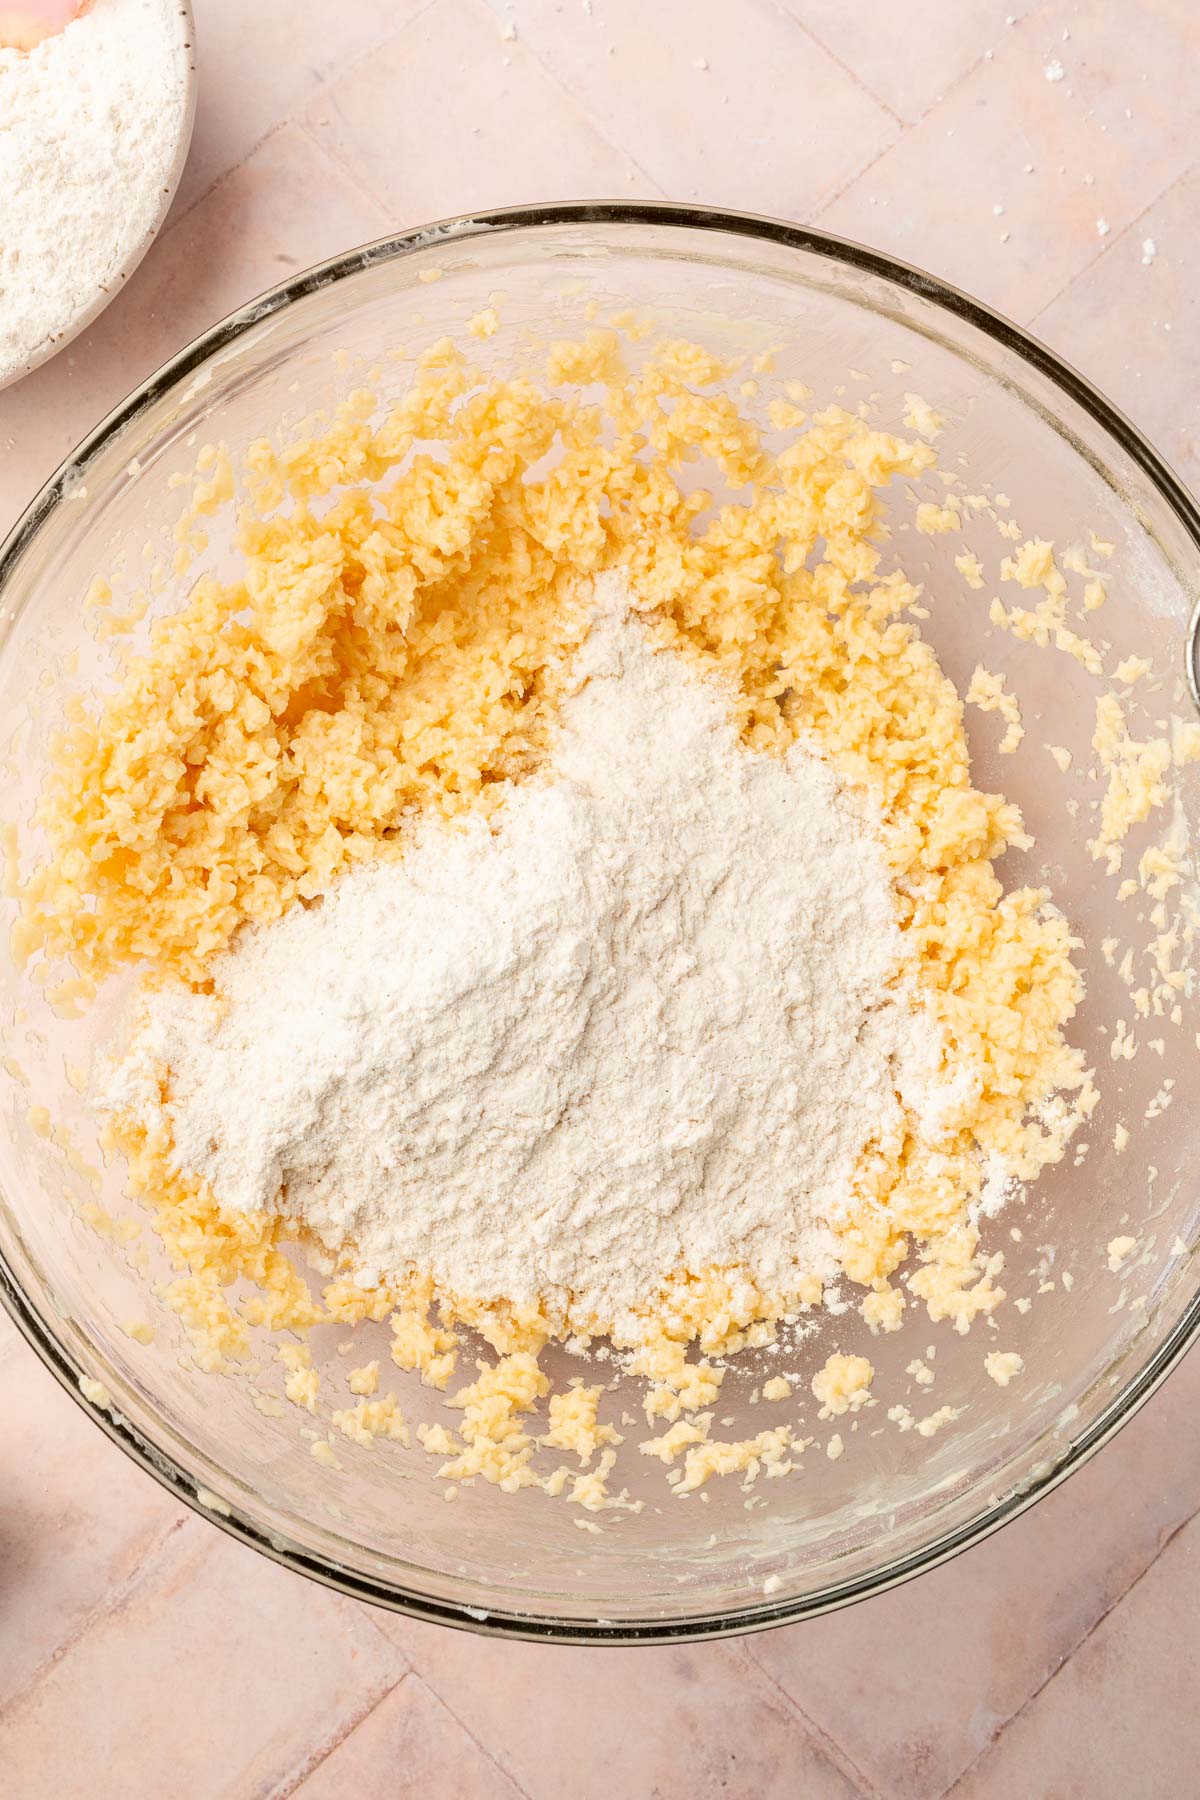 An overhead view of a butter, sugar and egg mixture topped with gluten-free flour in a glass mixing bowl.